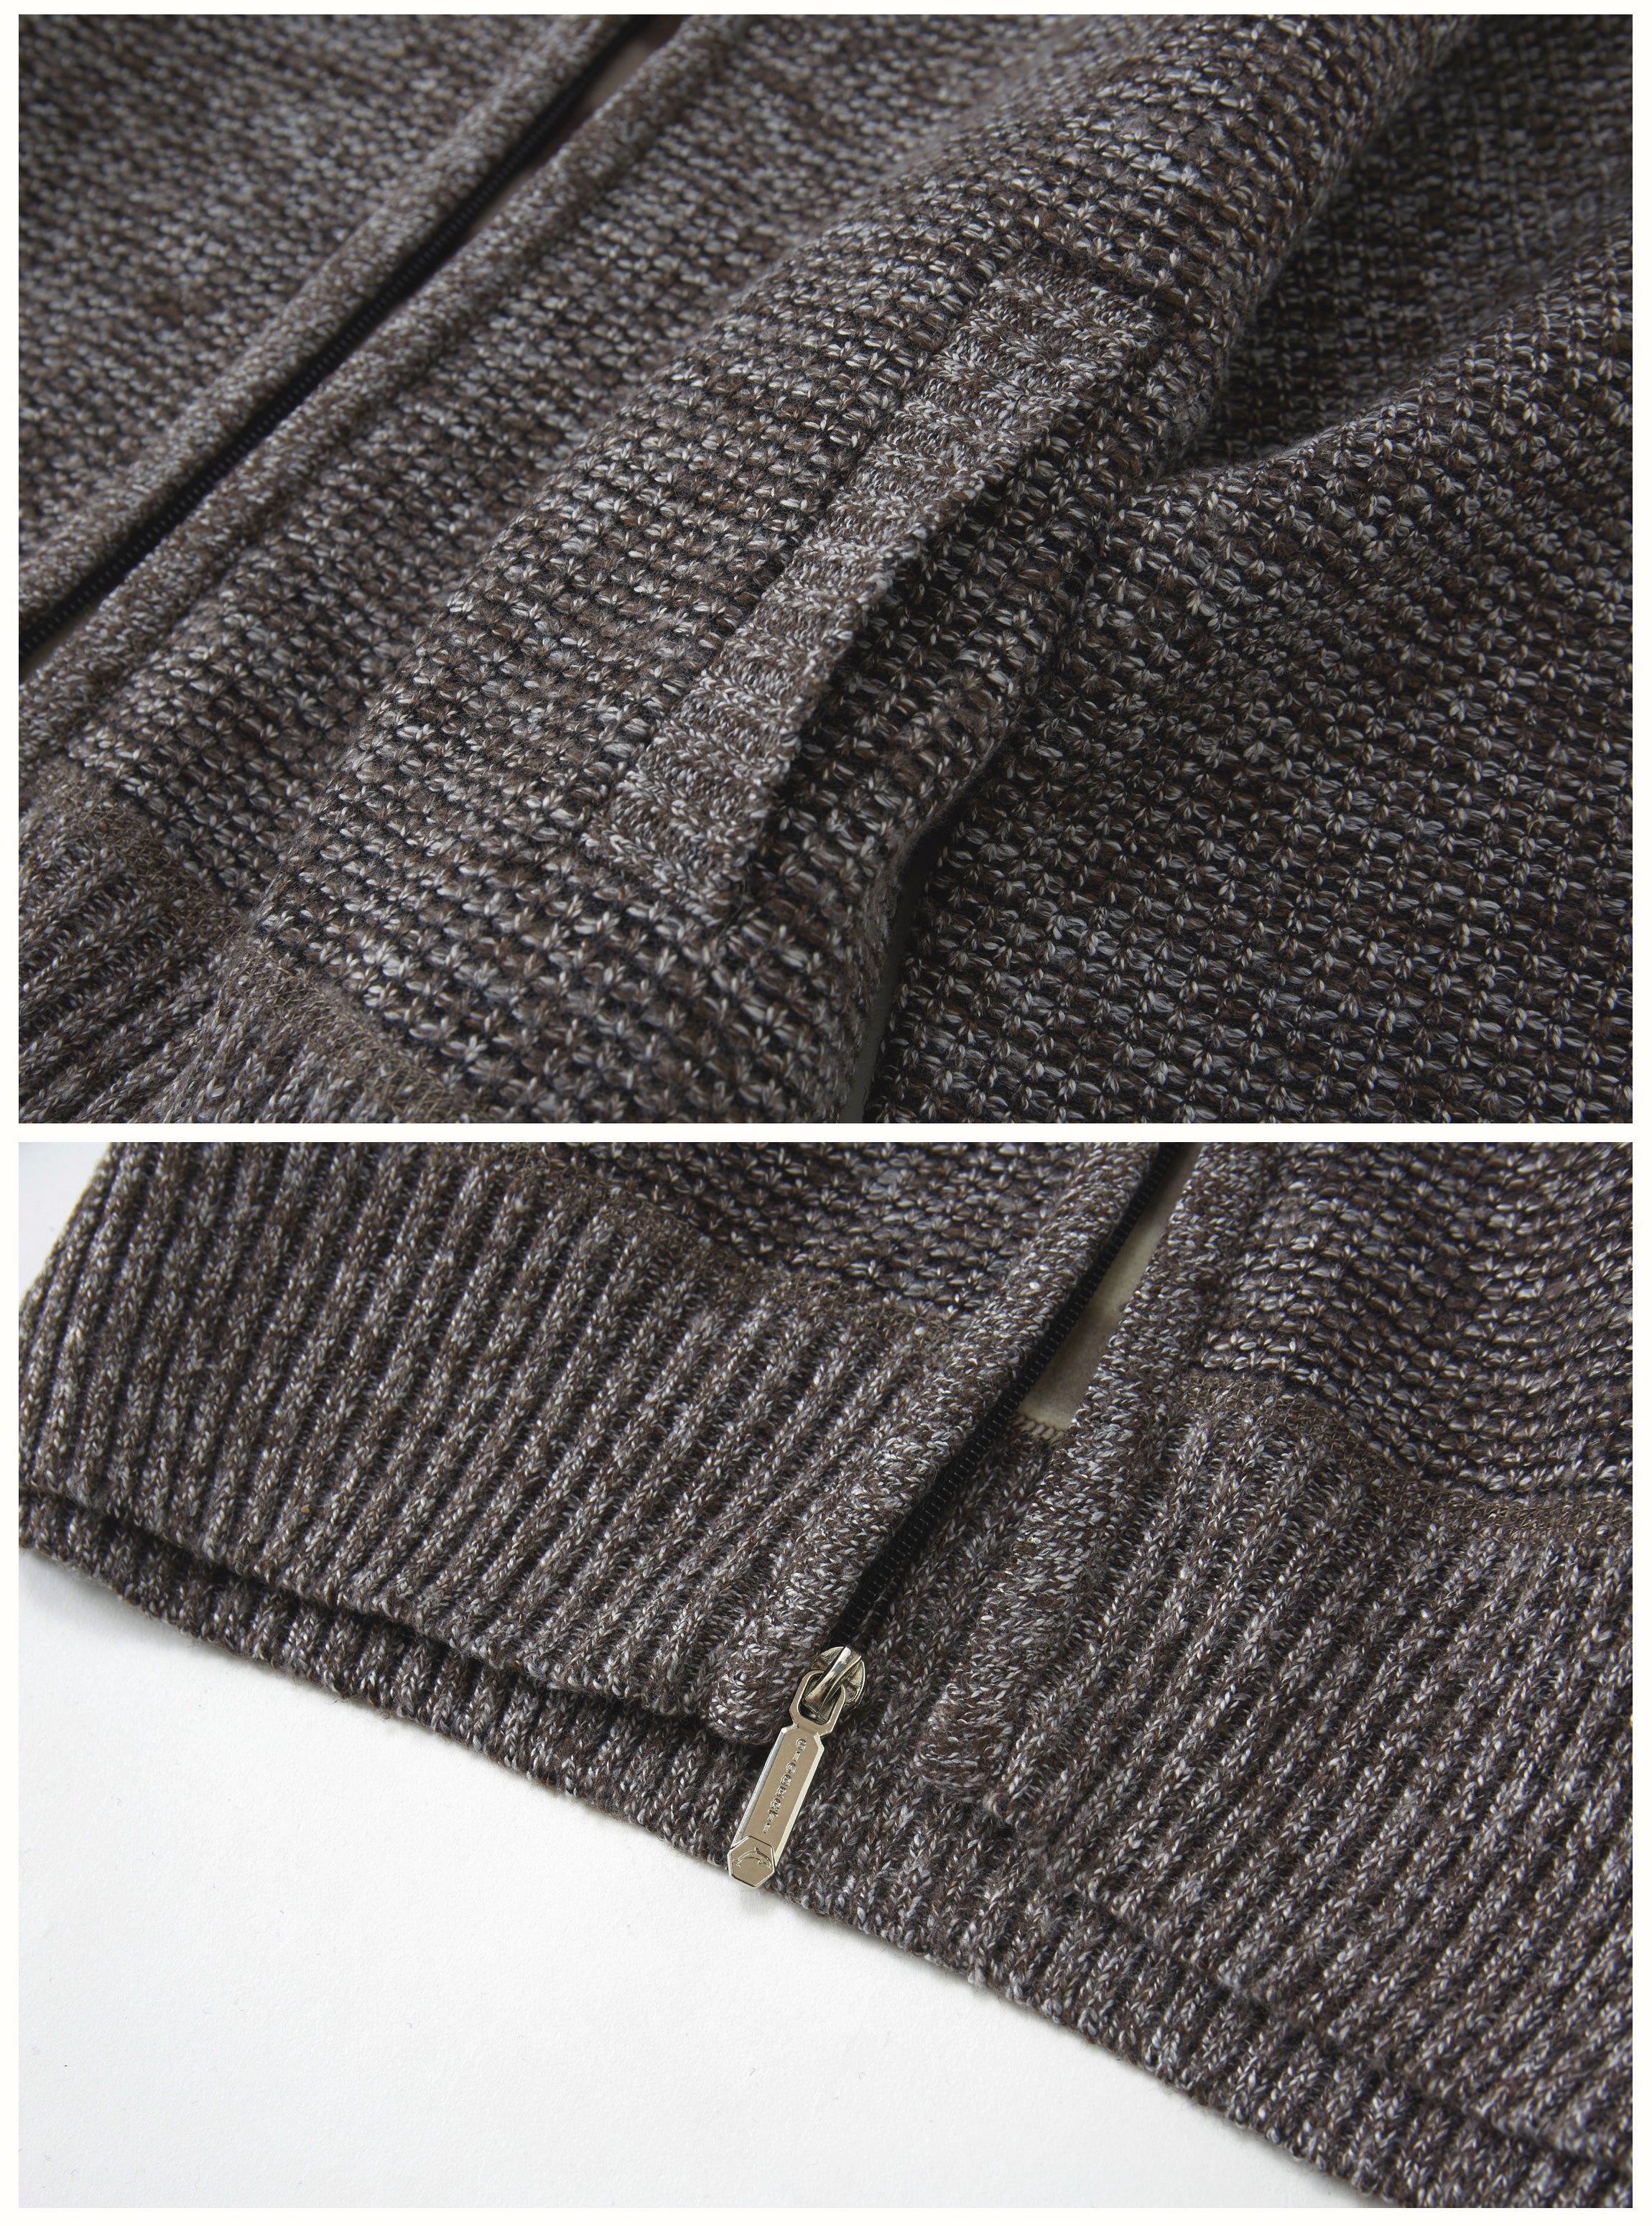 title:Gioberti Men's Marled Coffee Knitted Regular Fit Full Zip Cardigan Sweater with Soft Brushed Flannel Lining;color:Marled Coffee